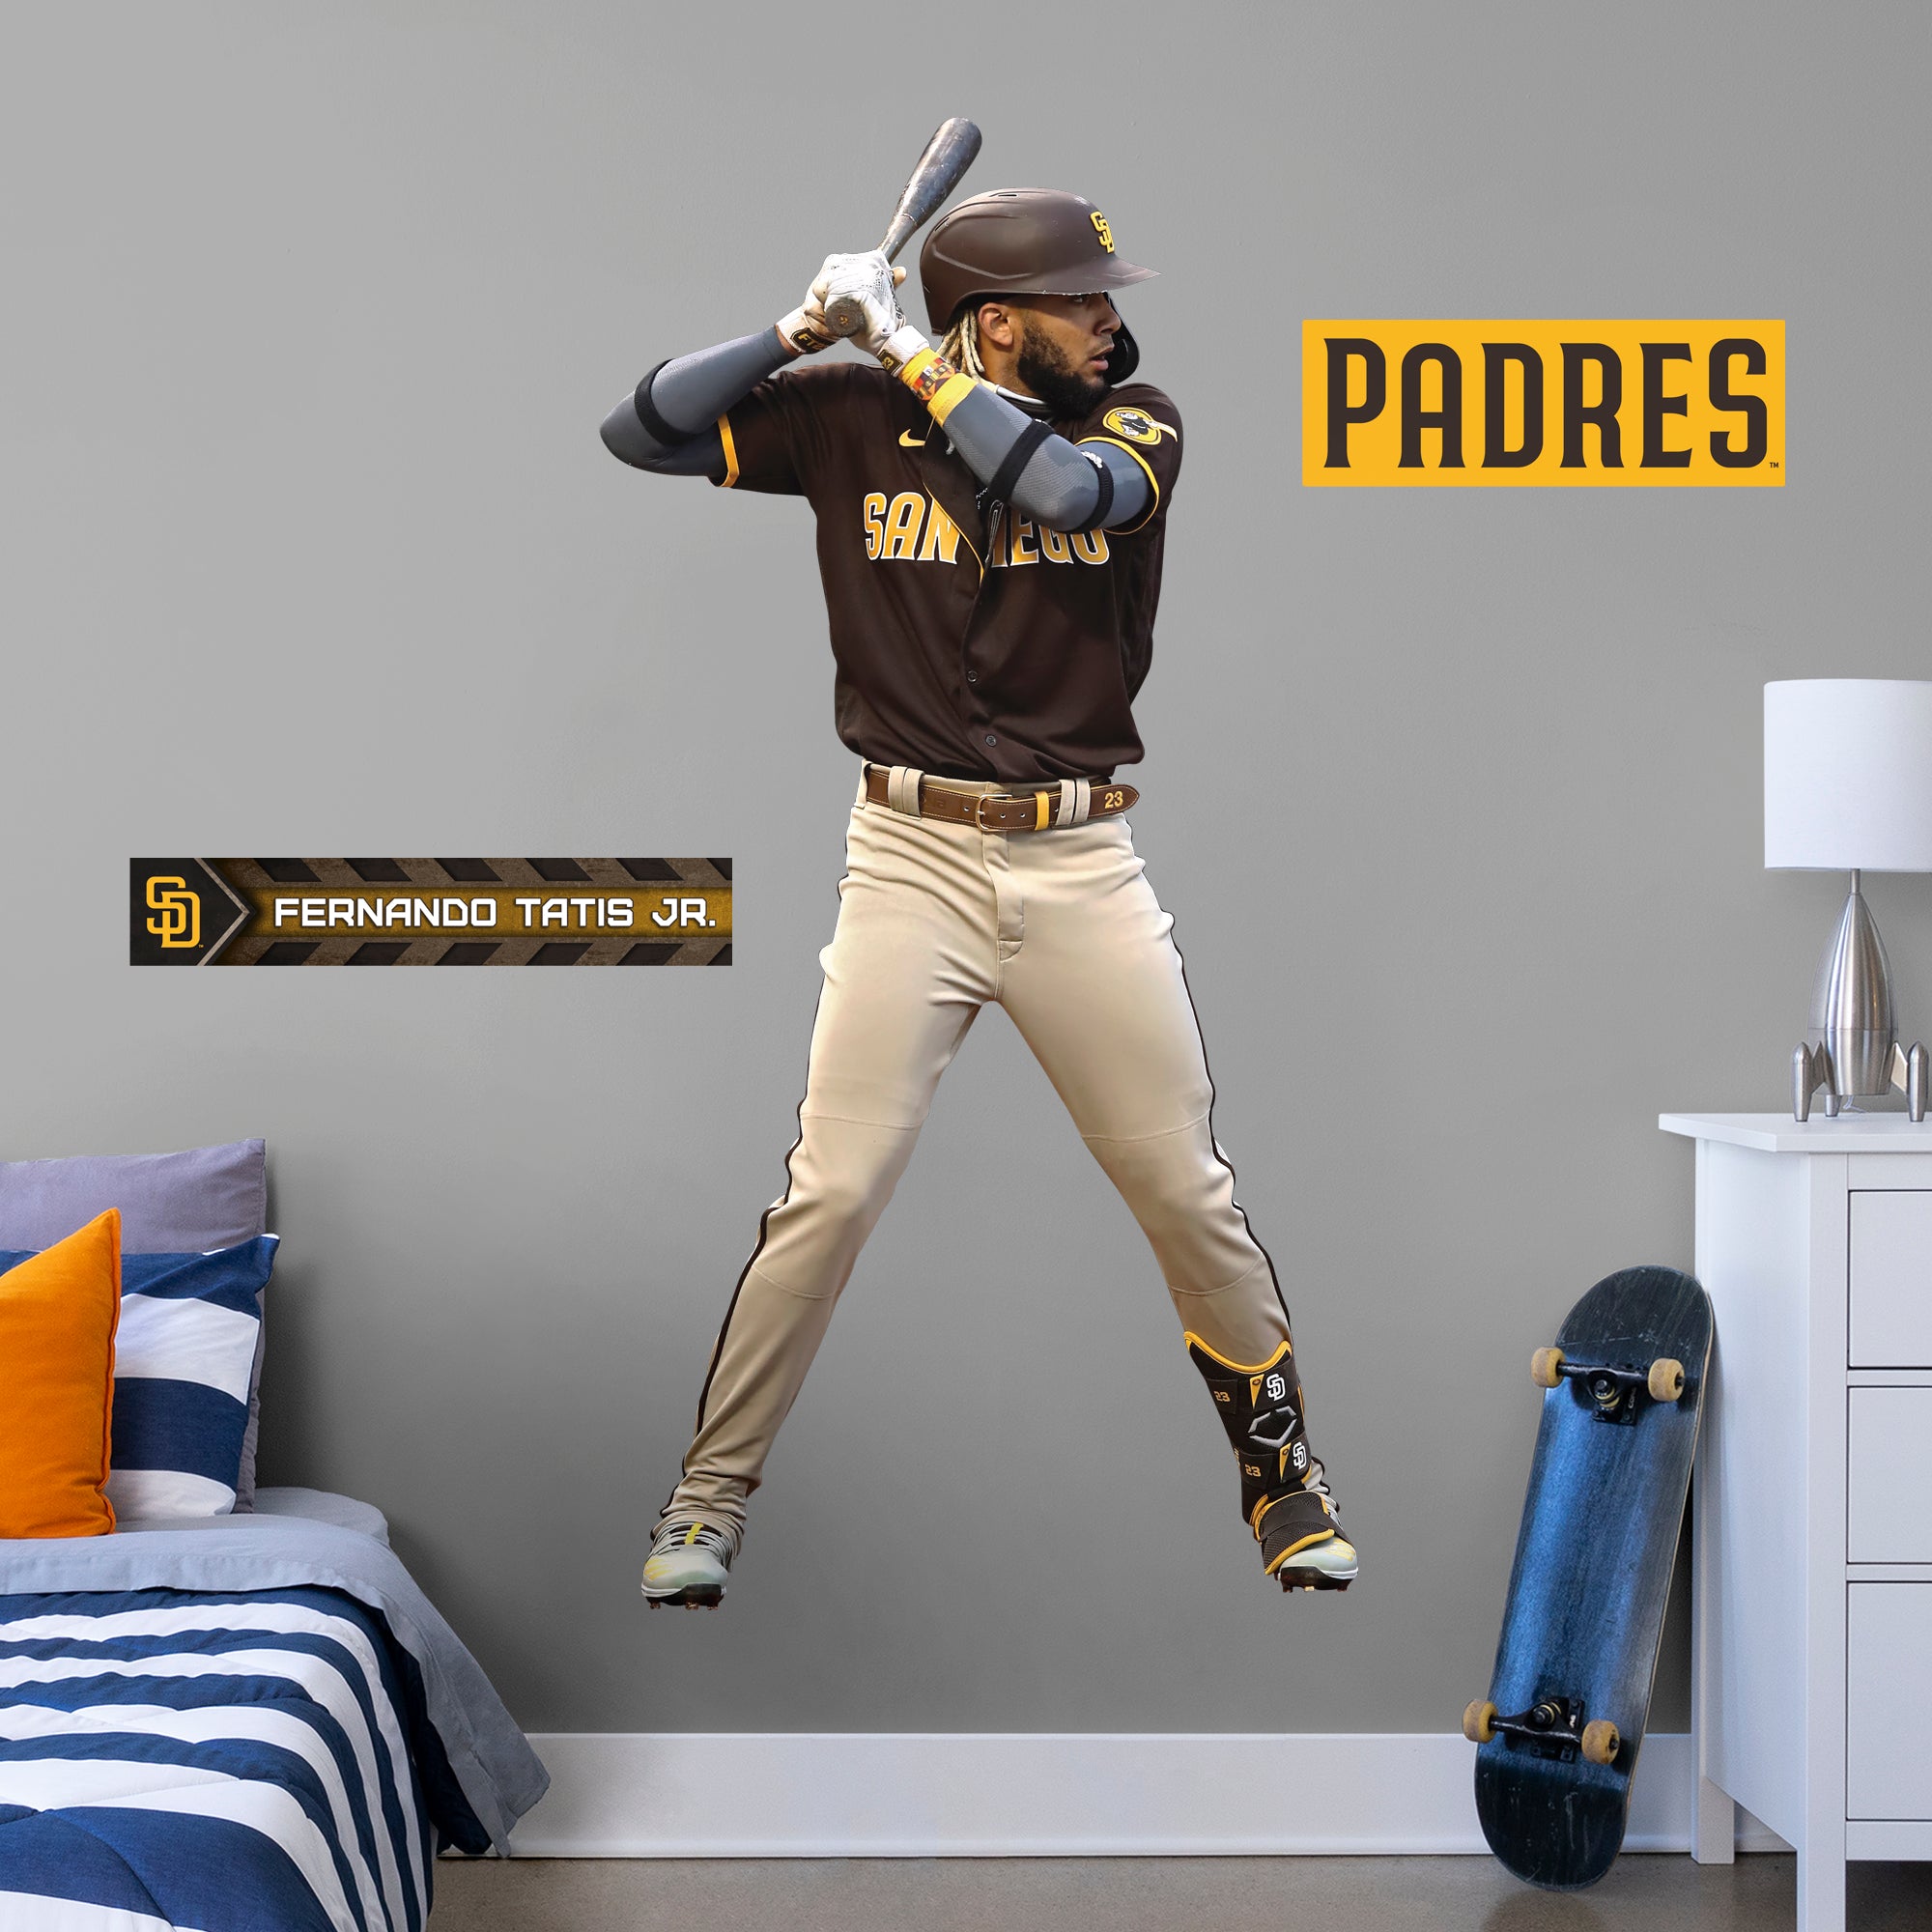 Fernando Tatis Jr for San Diego Padres: RealBig Officially Licensed MLB Removable Wall Decal Life-Size Athlete + 2 Decals by Fat